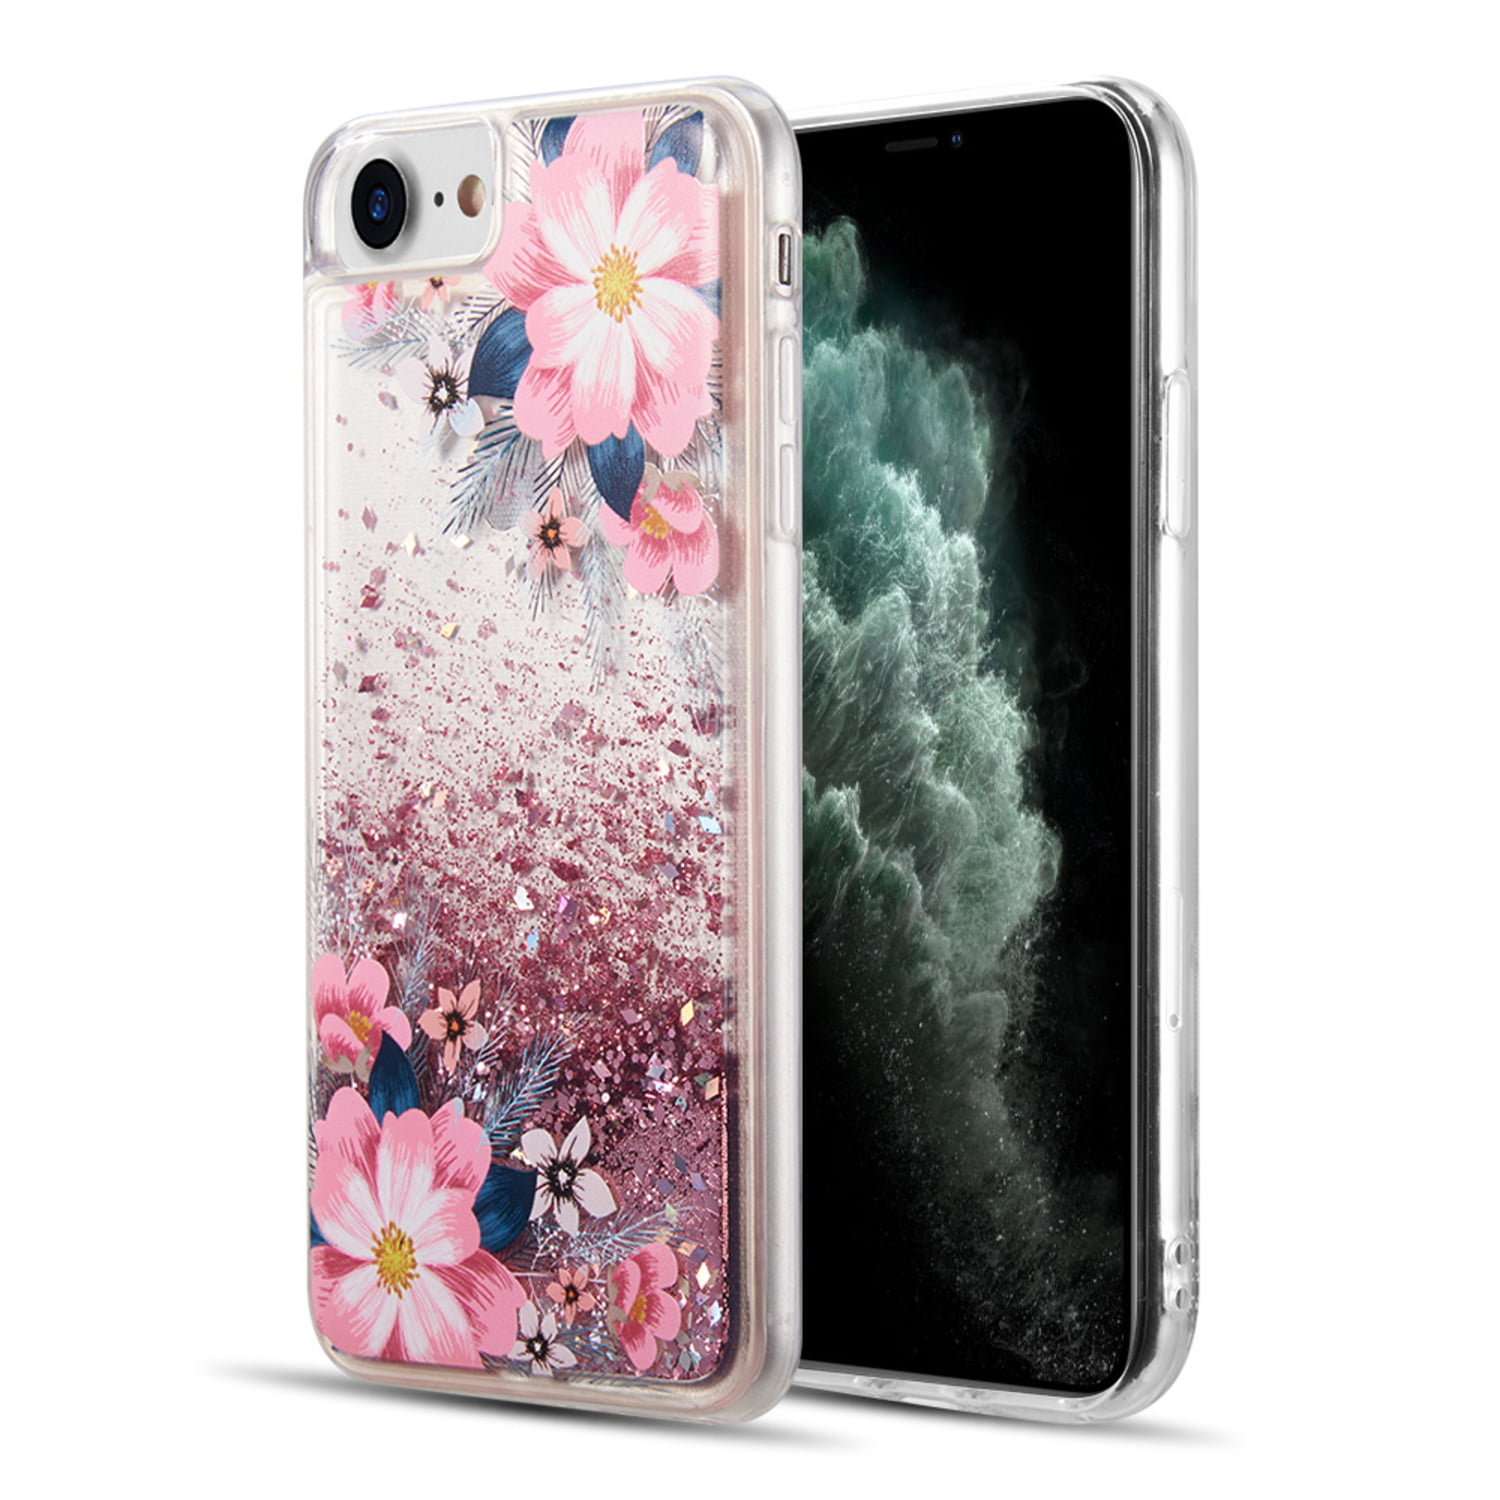 WATERFALL LIQUID SPARKLING QUICKSAND TPU CASE SGS CERTIFIED FOR IPHONE ...